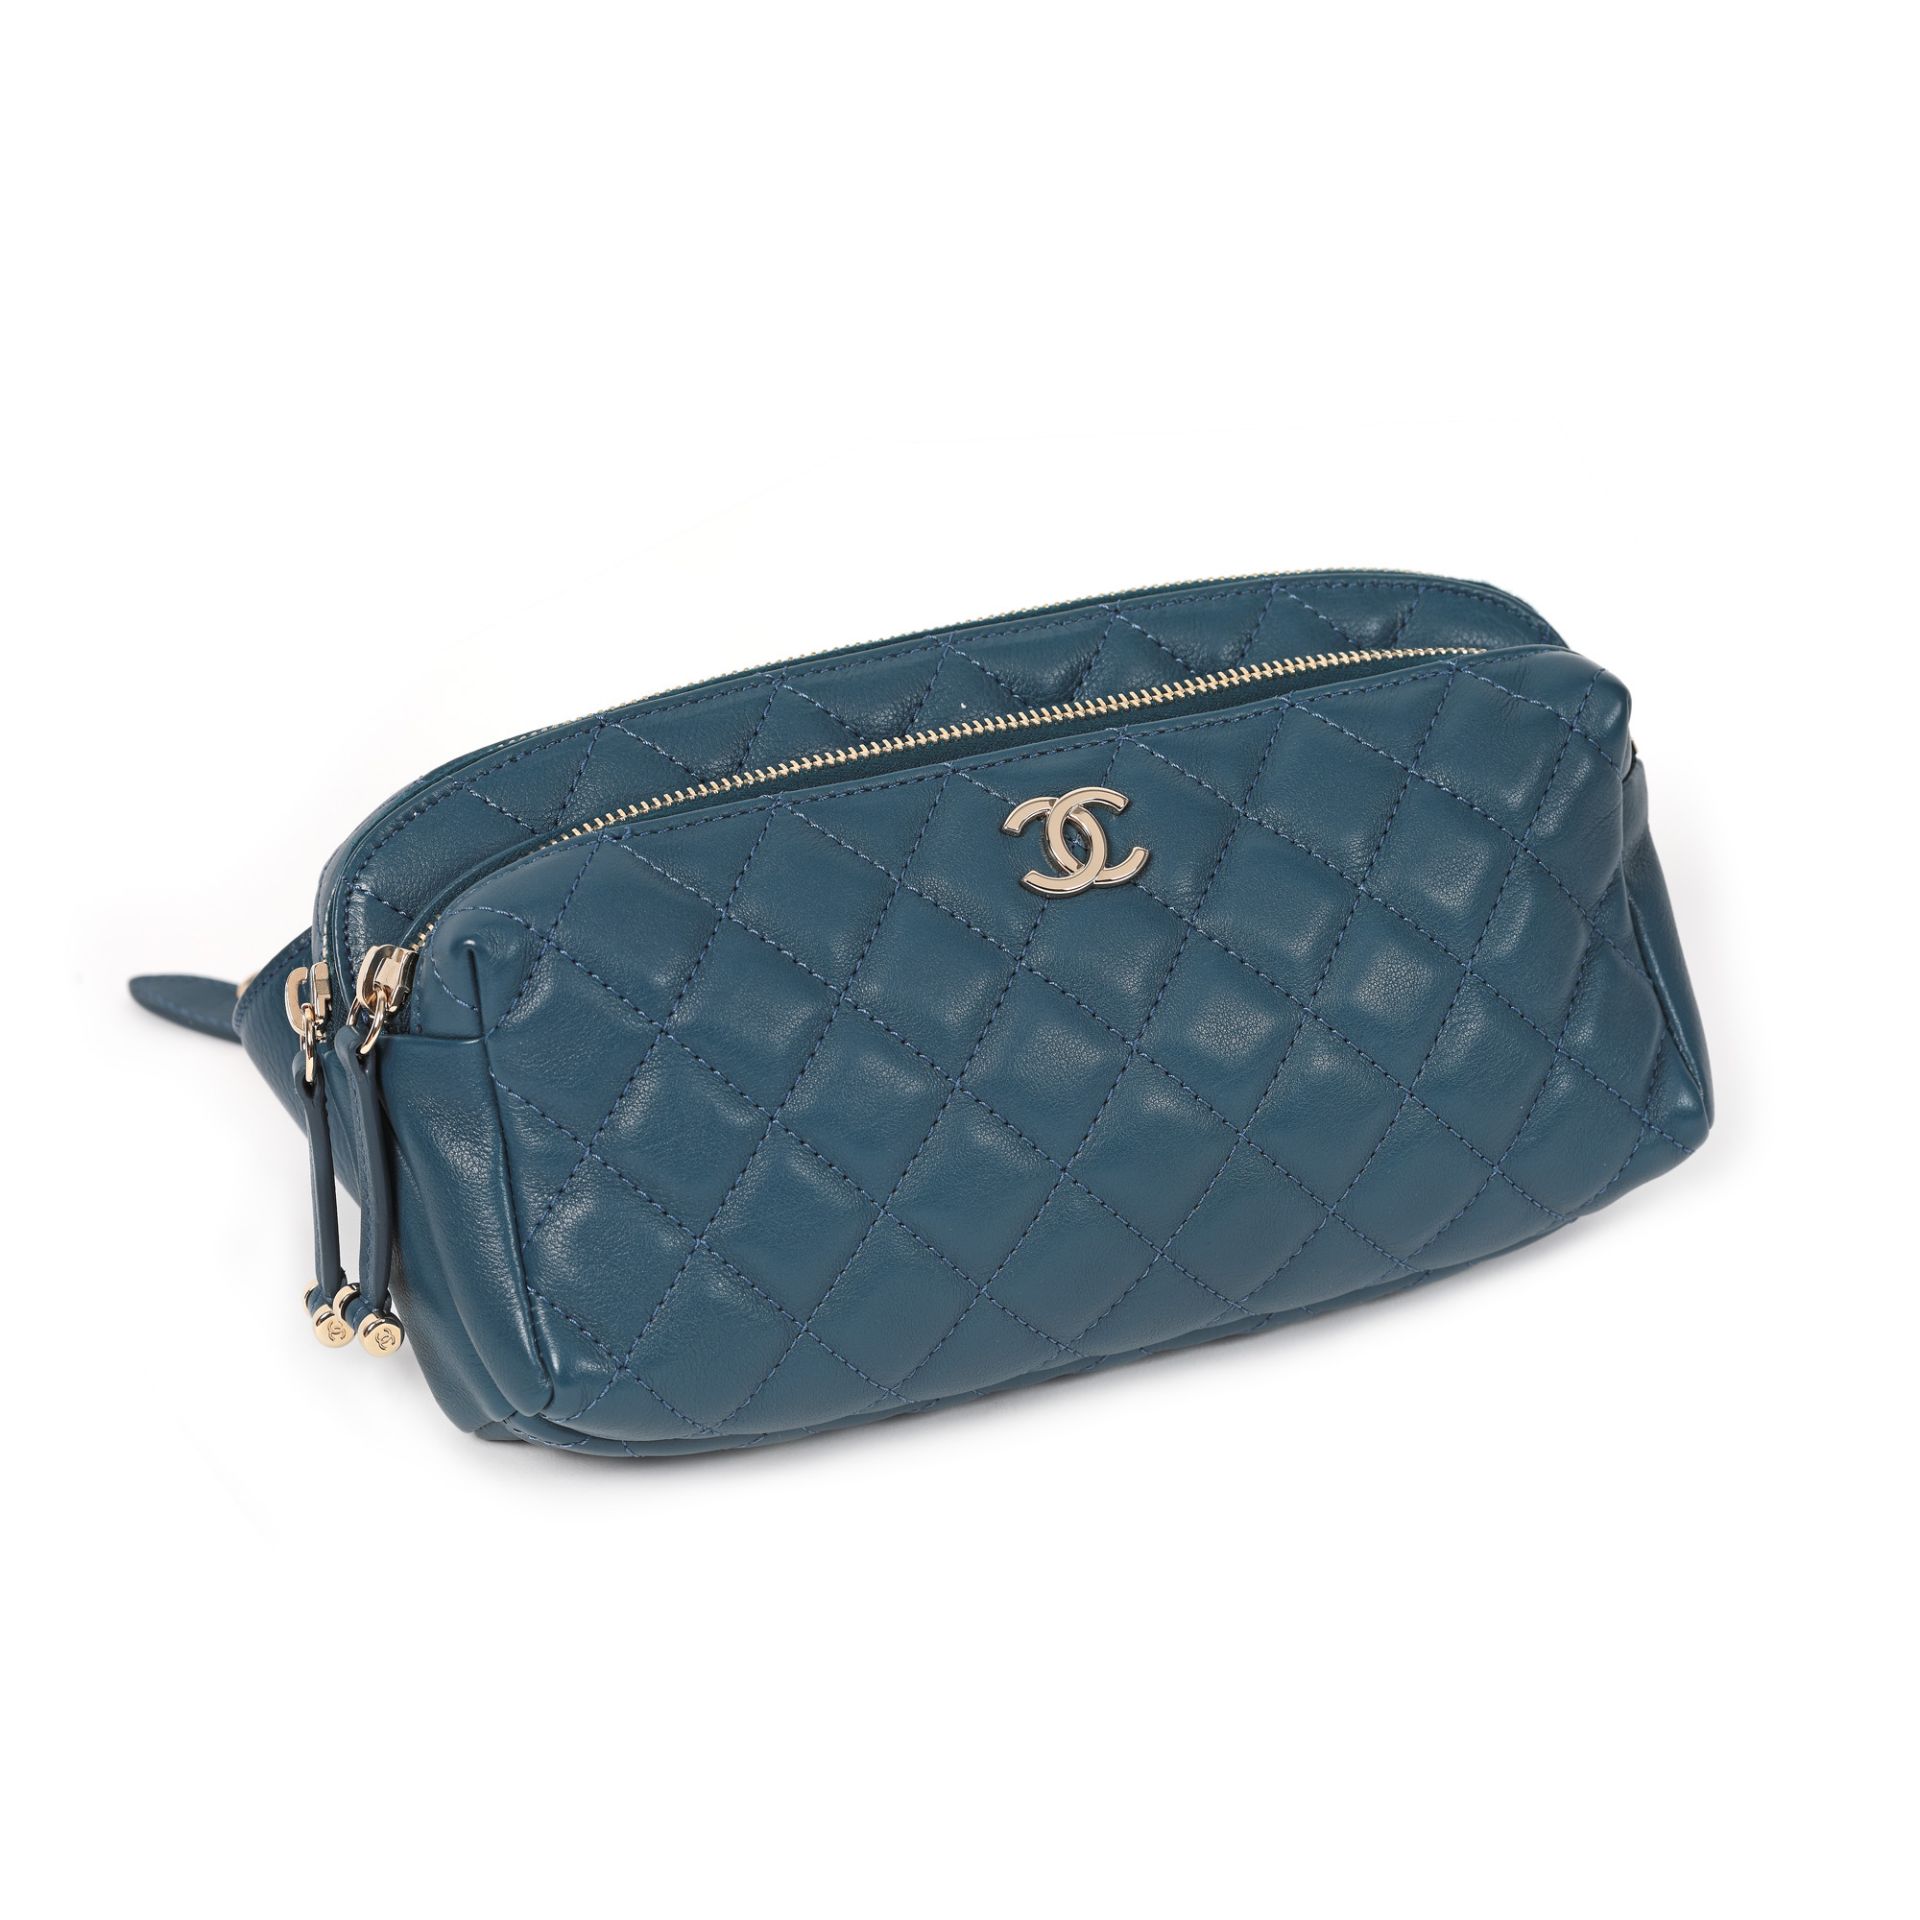 Chanel carrying case, quilted leather, blue